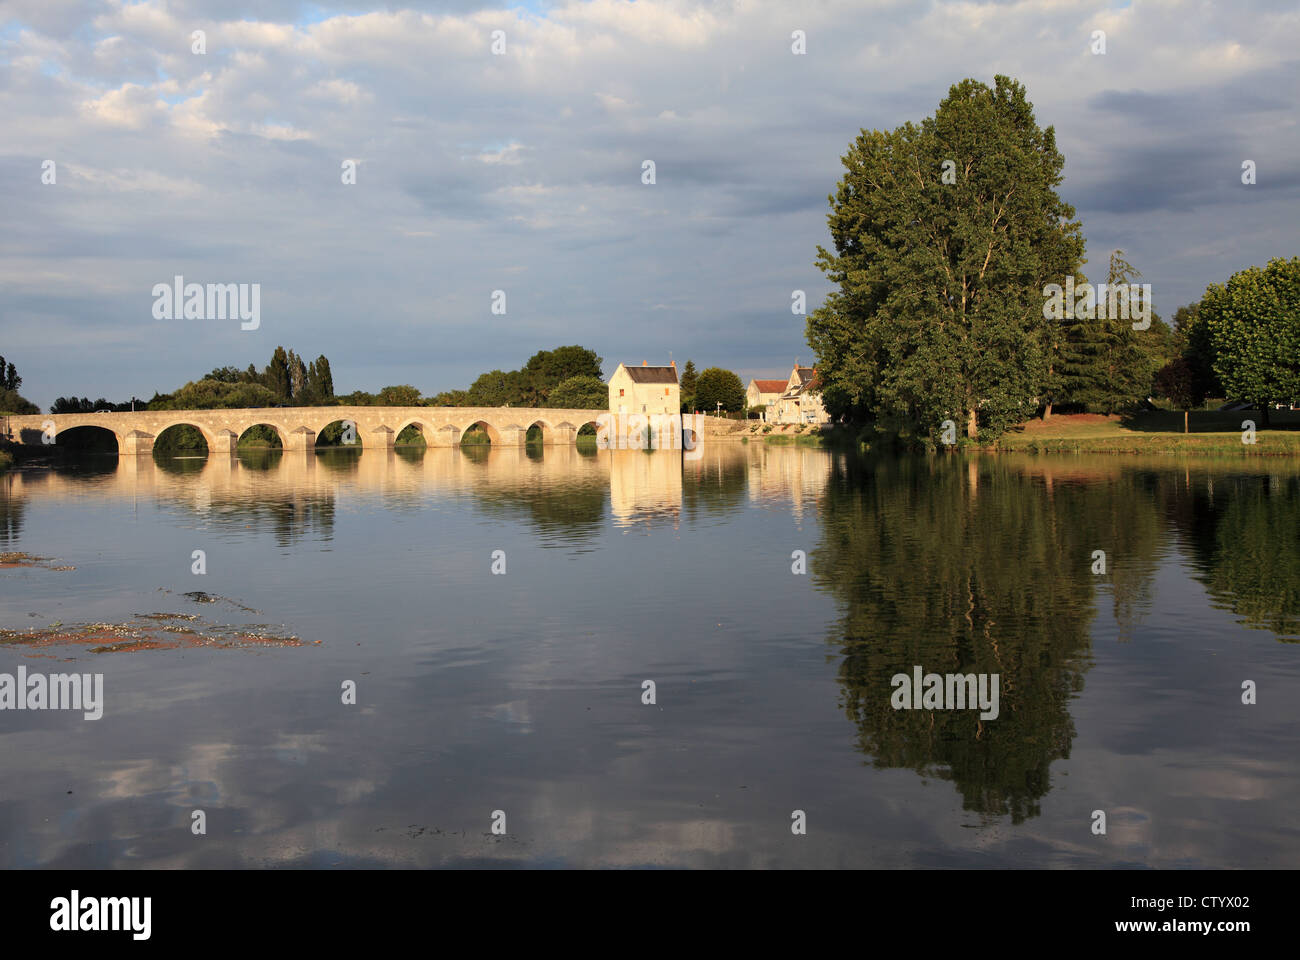 The bridge over the river Cher at Montrichard sur Cher seen in warm evening light, France. Stock Photo